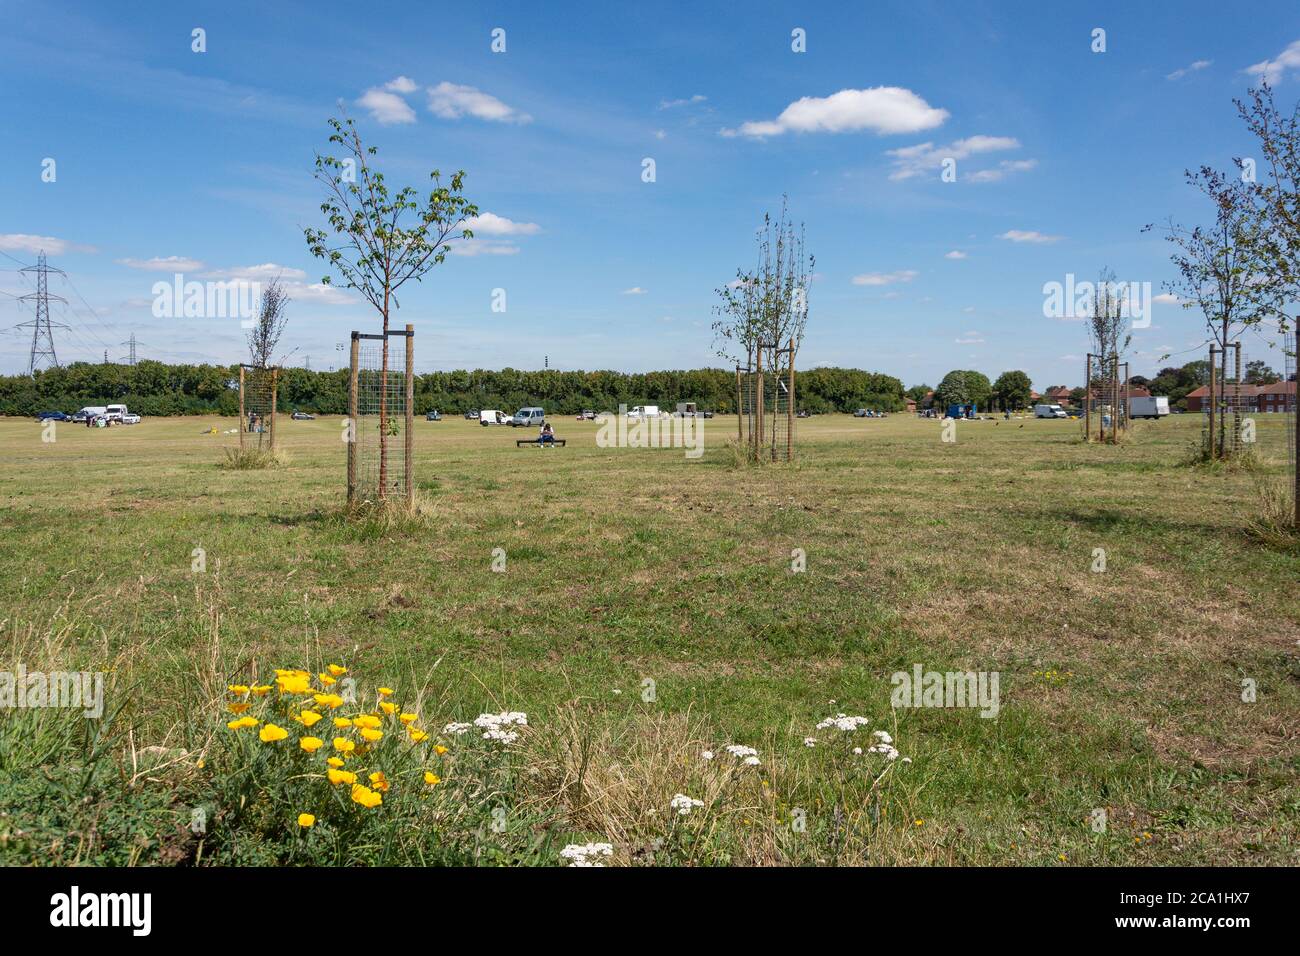 St Helier Open Space, Wrythe Lane, Rosehill, London Borough of Sutton, Greater London, England, United Kingdom Stock Photo